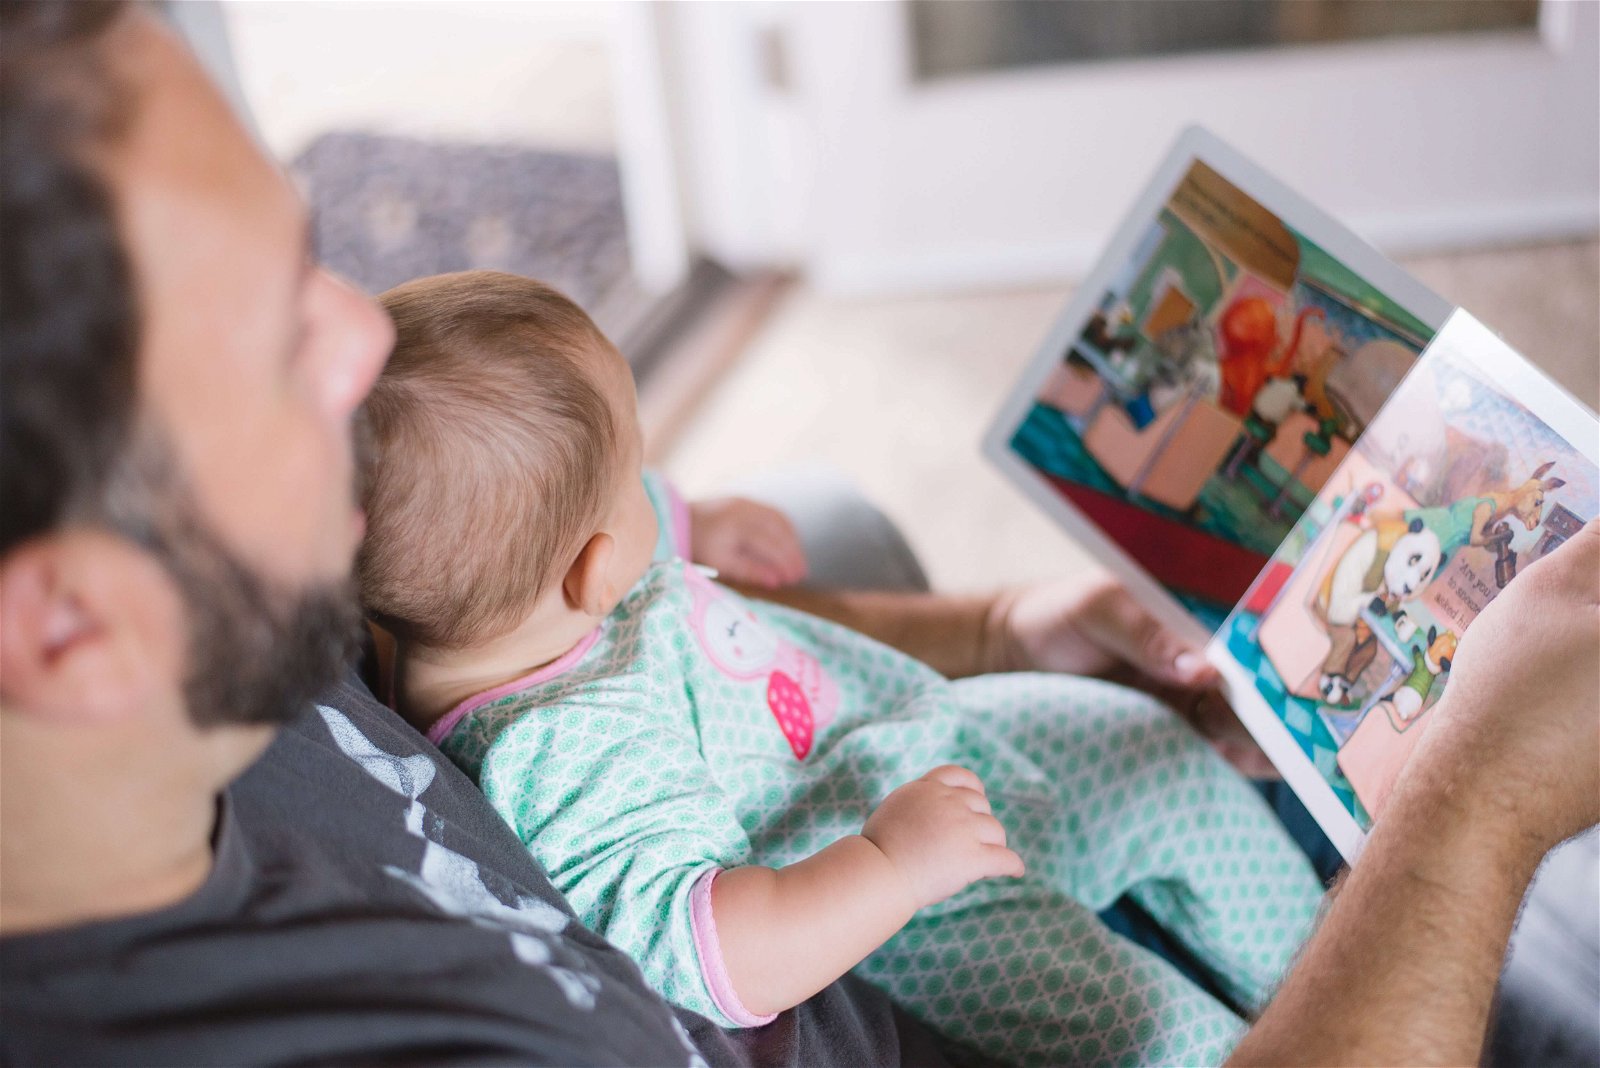 Dad reading with baby